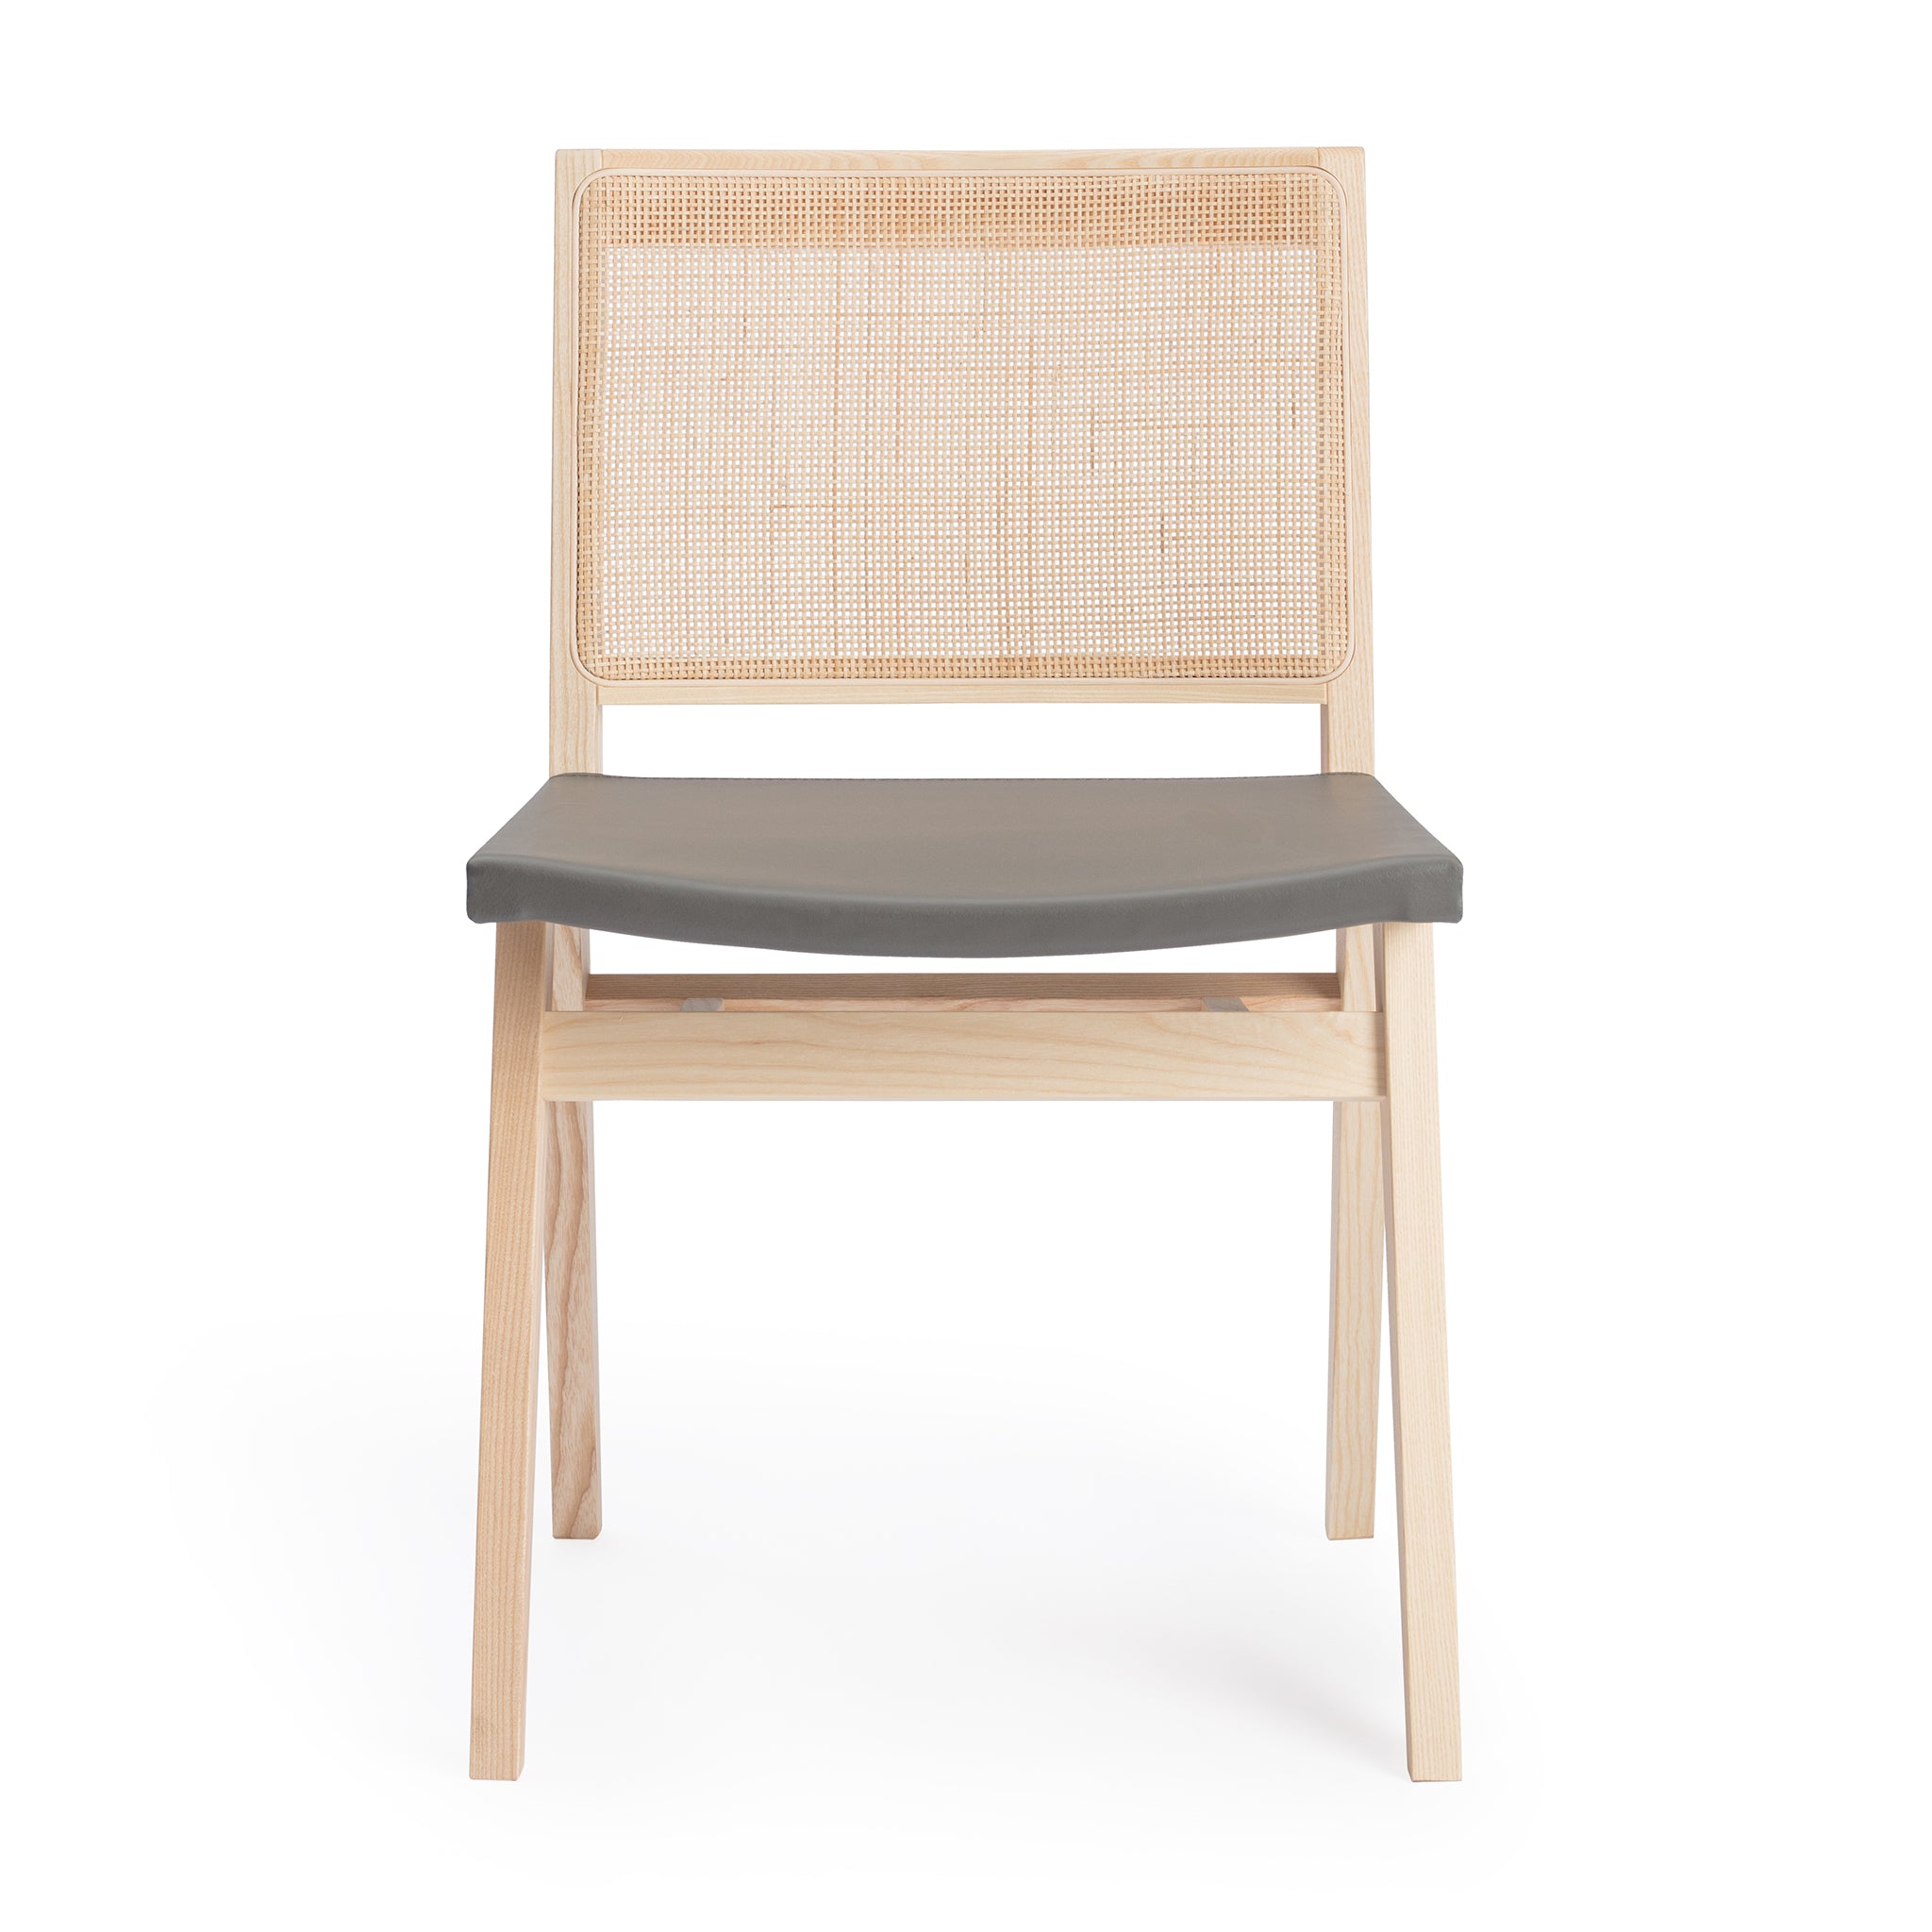 Front view of an "Elye" modern dining chair, walnut stained ash frame, square weave cane back, contract grade off white leather seat, produced by Klarel in Italy. #K41-3